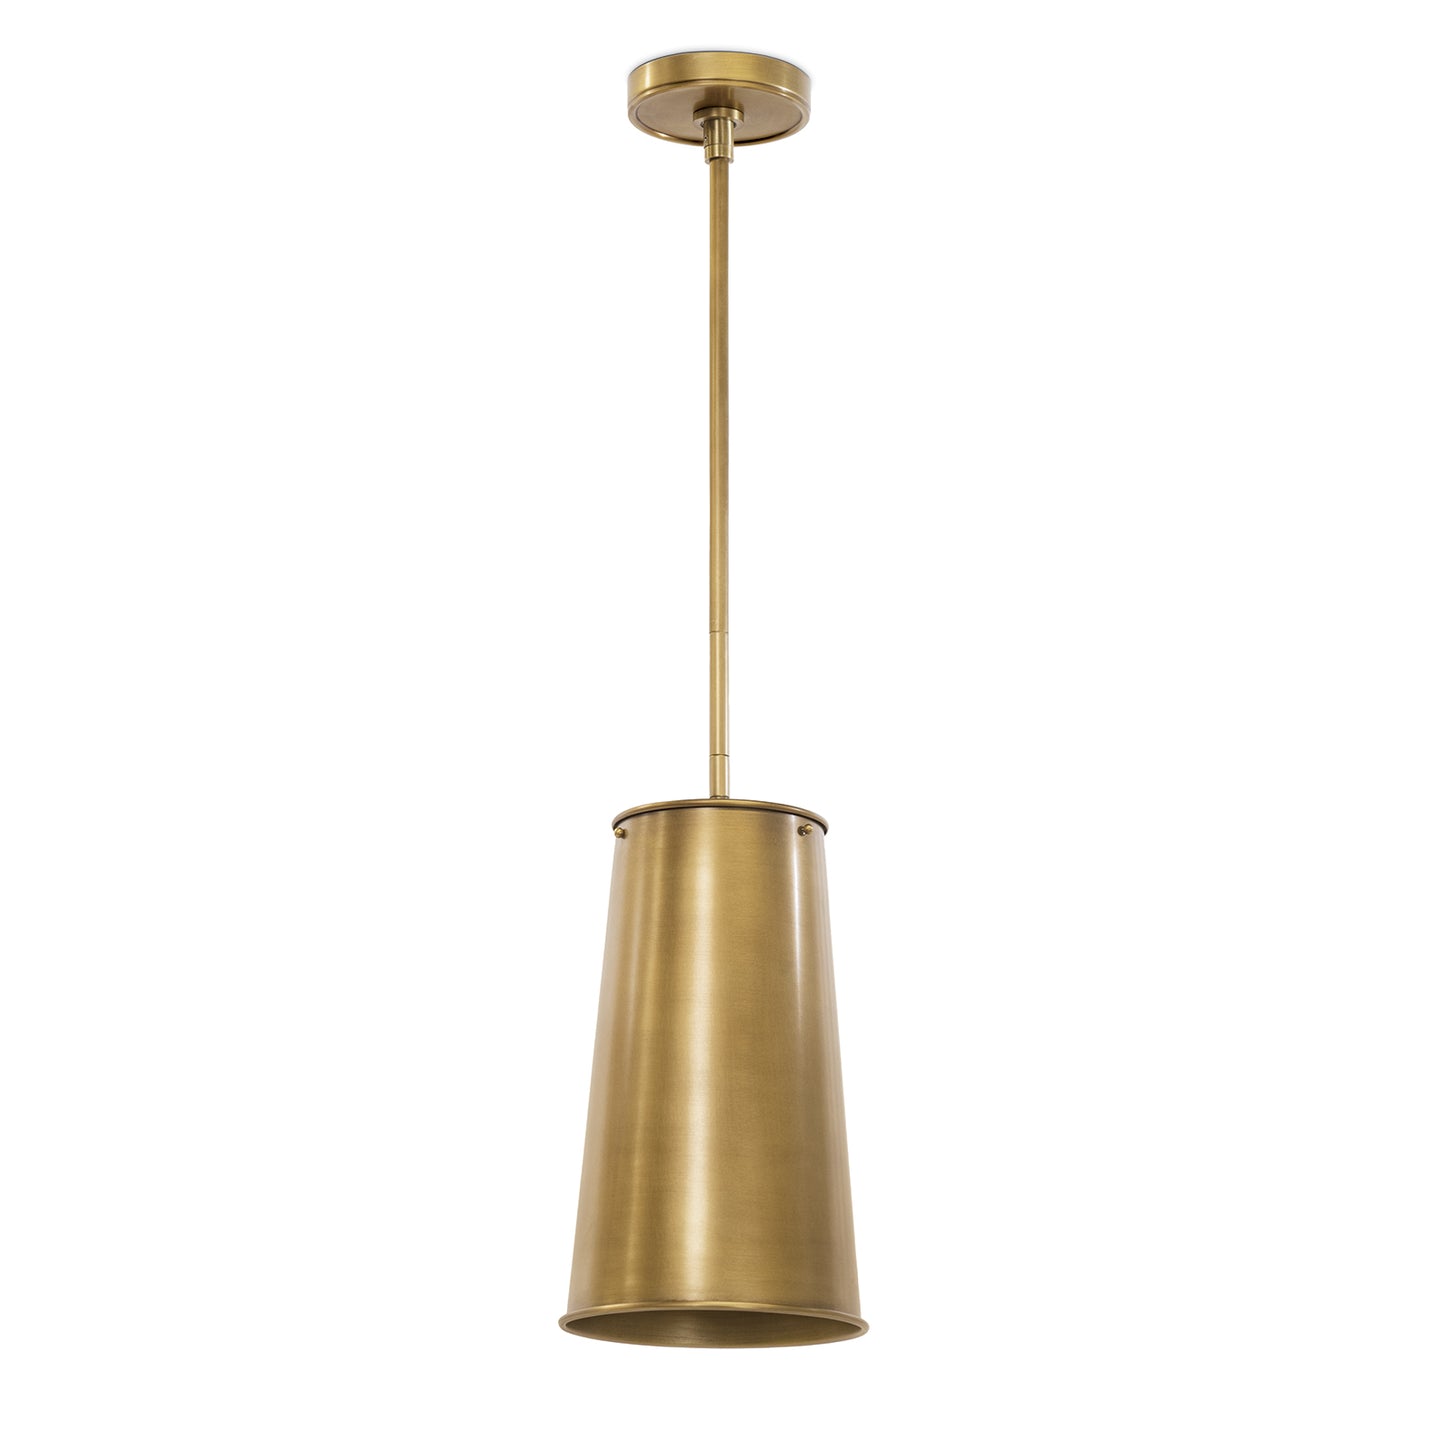 Hattie Pendant in Natural Brass by Southern Living